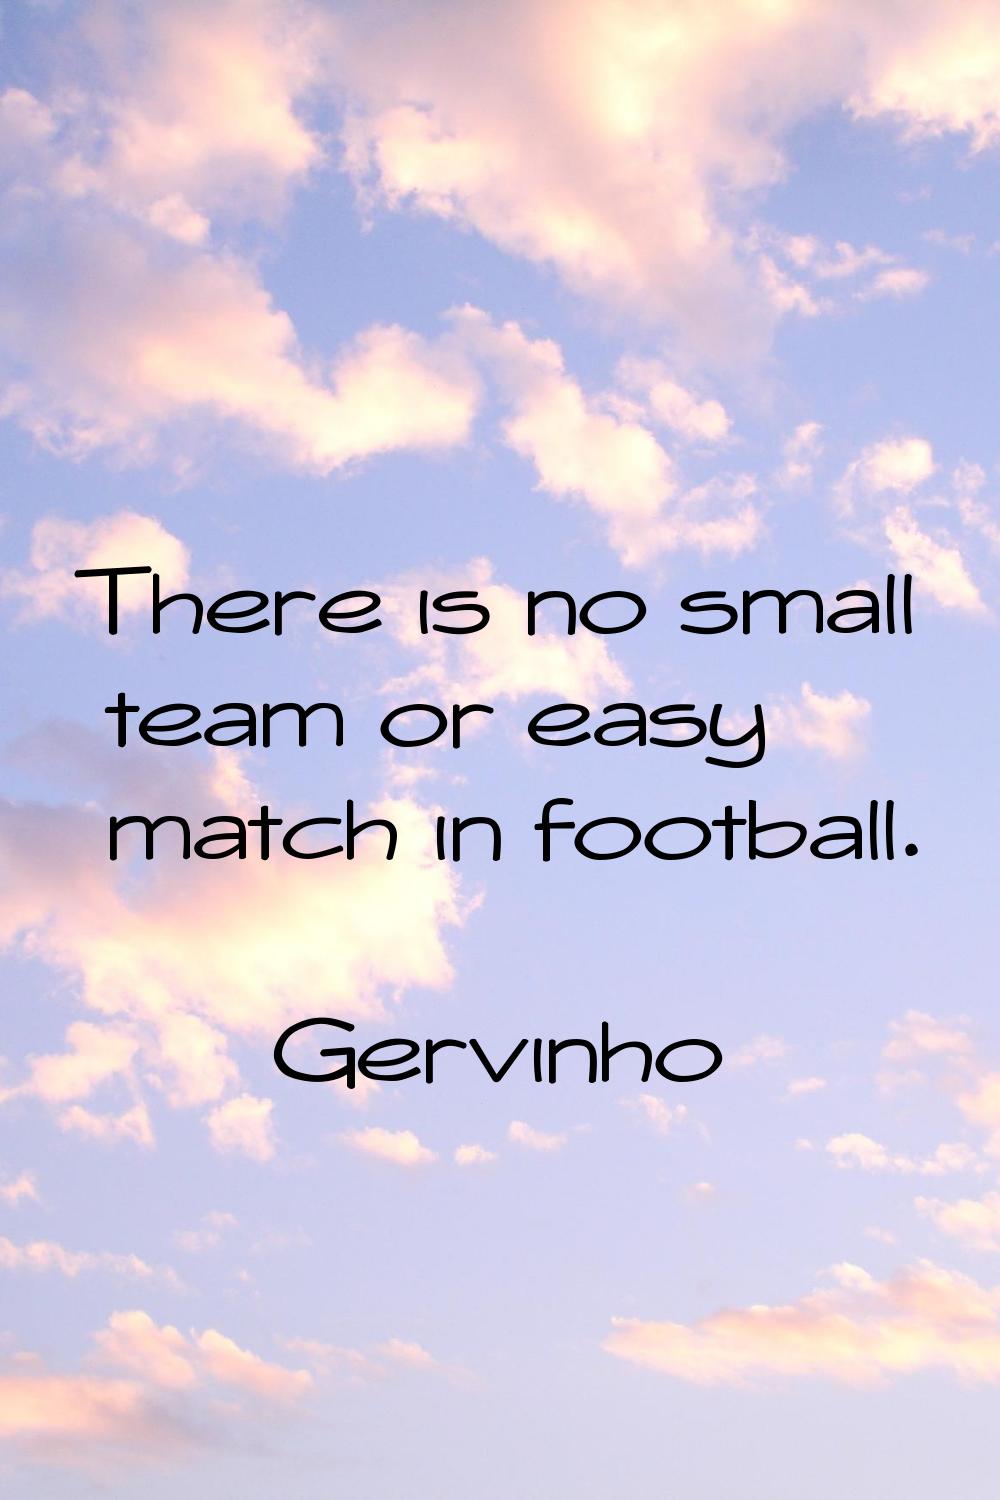 There is no small team or easy match in football.